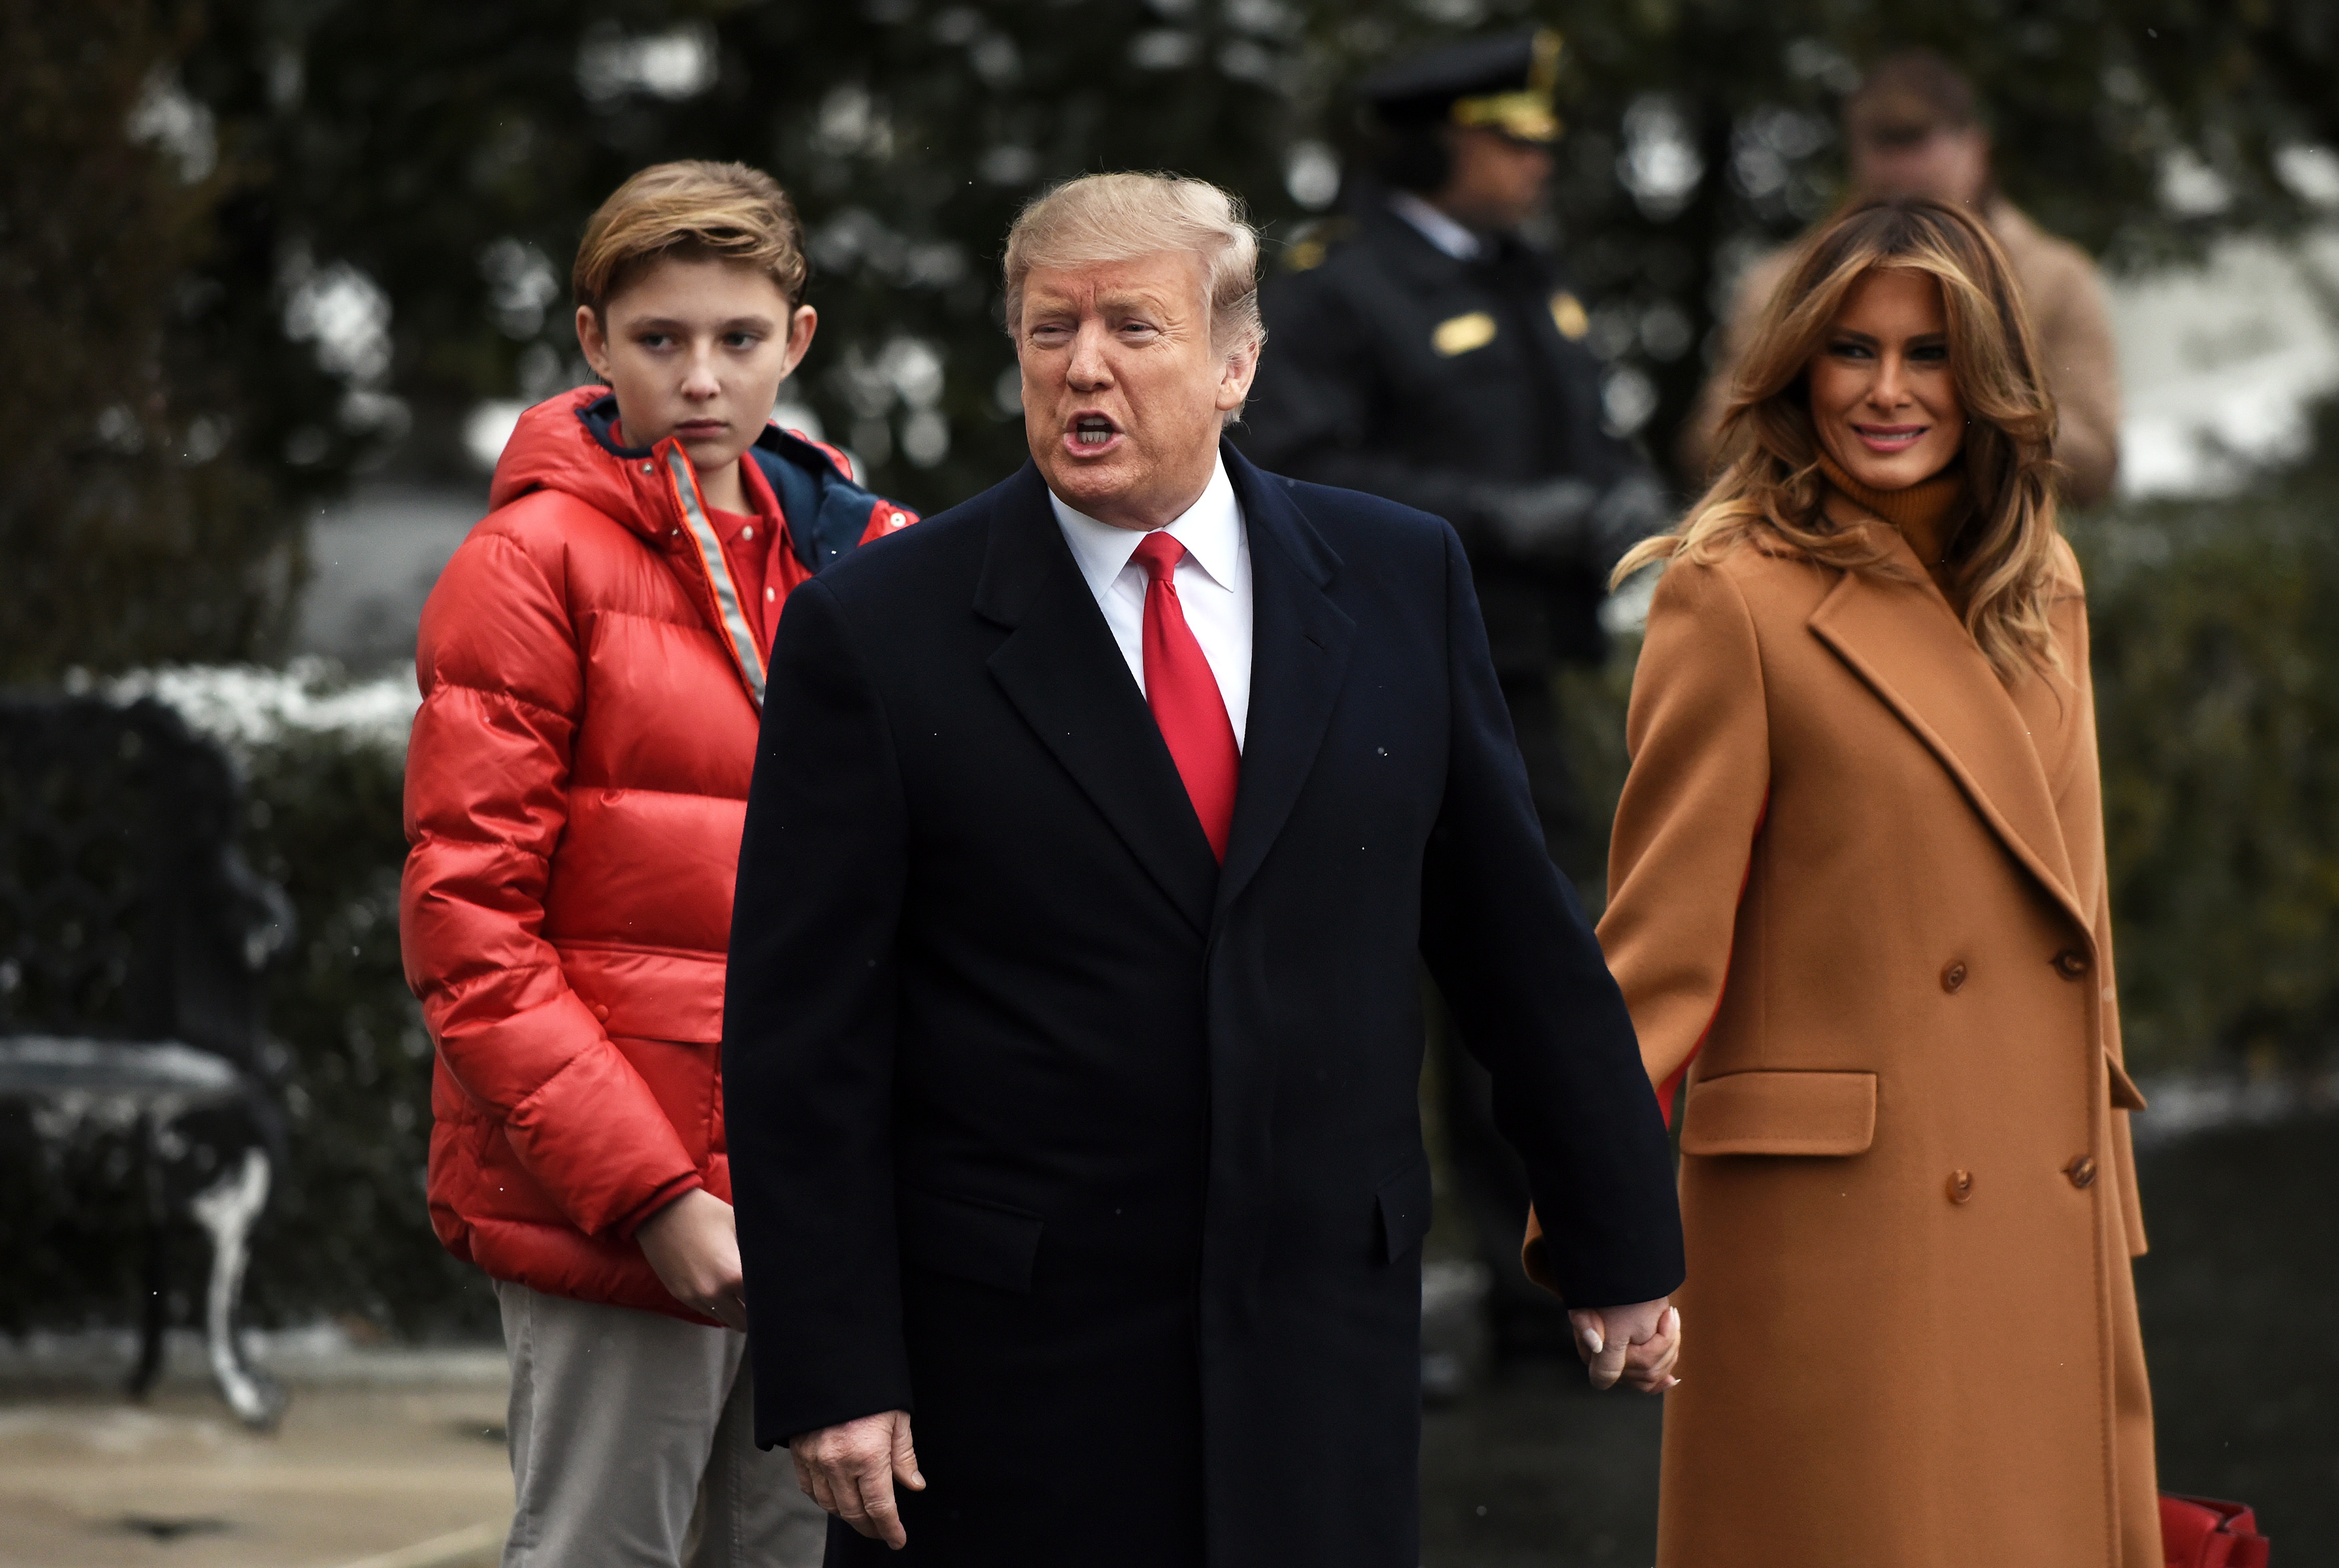 epa07337278 US President Donald J. Trump (C) with First Lady Melania Trump (R) and their son Barron Trump (L) departs the White House en route to Florida on Marine One in Washington, DC, USA, 01 February 2019.  EPA/OLIVIER DOULIERY